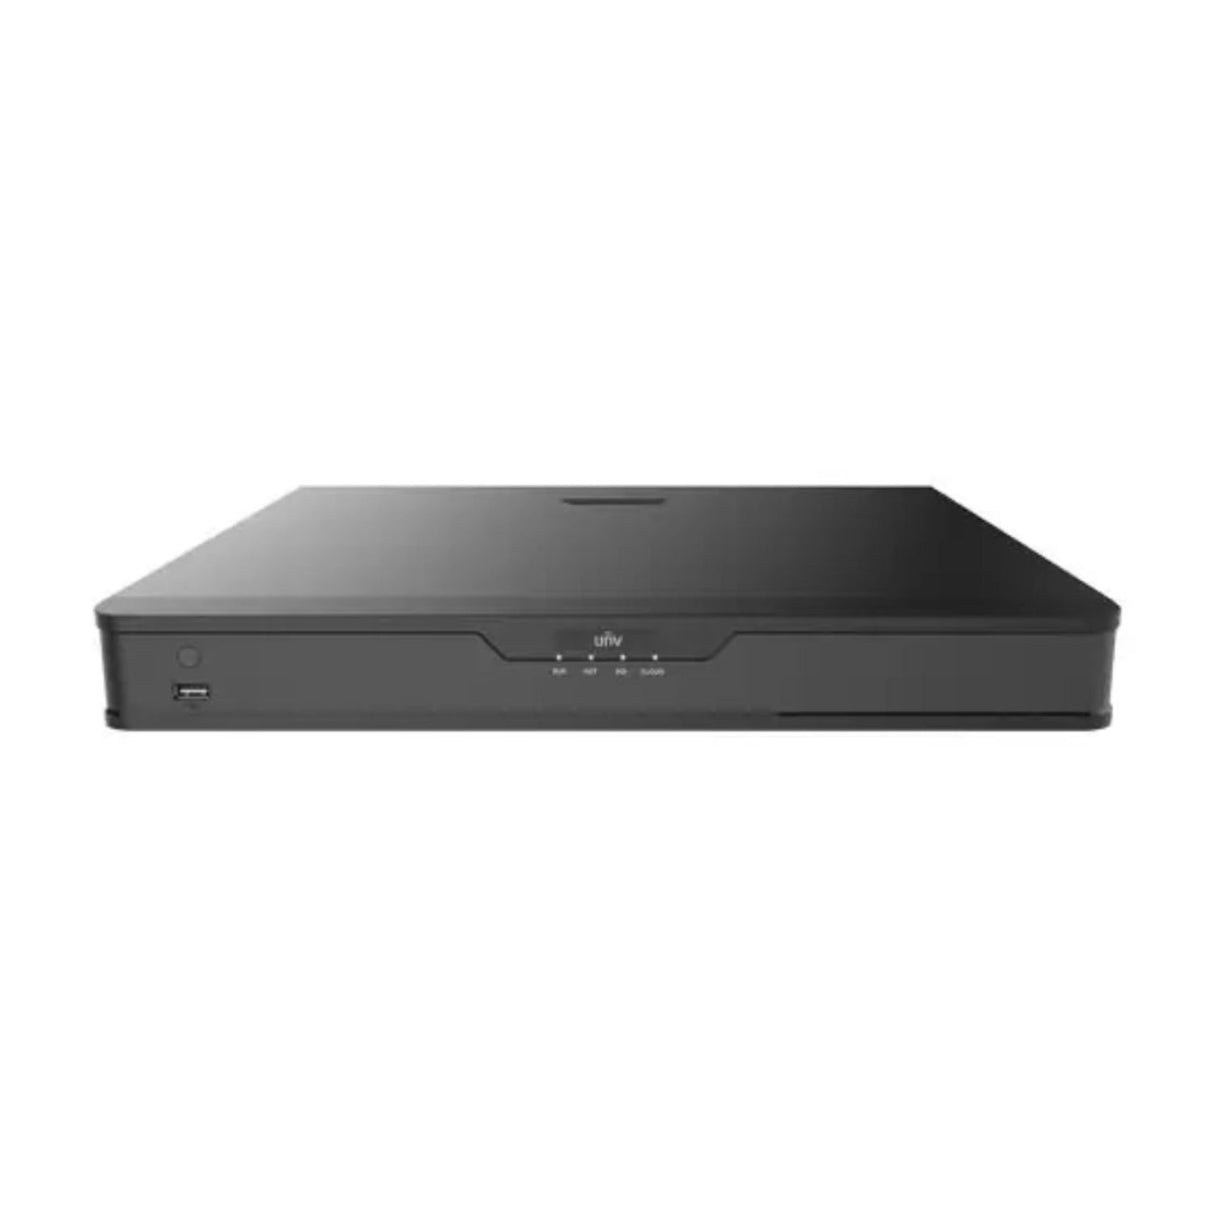 Uniview NVR302-08S-P8 (8CH) Network Video Recorder: 8MP (4K) Ultra HD, Supports 2 SATA